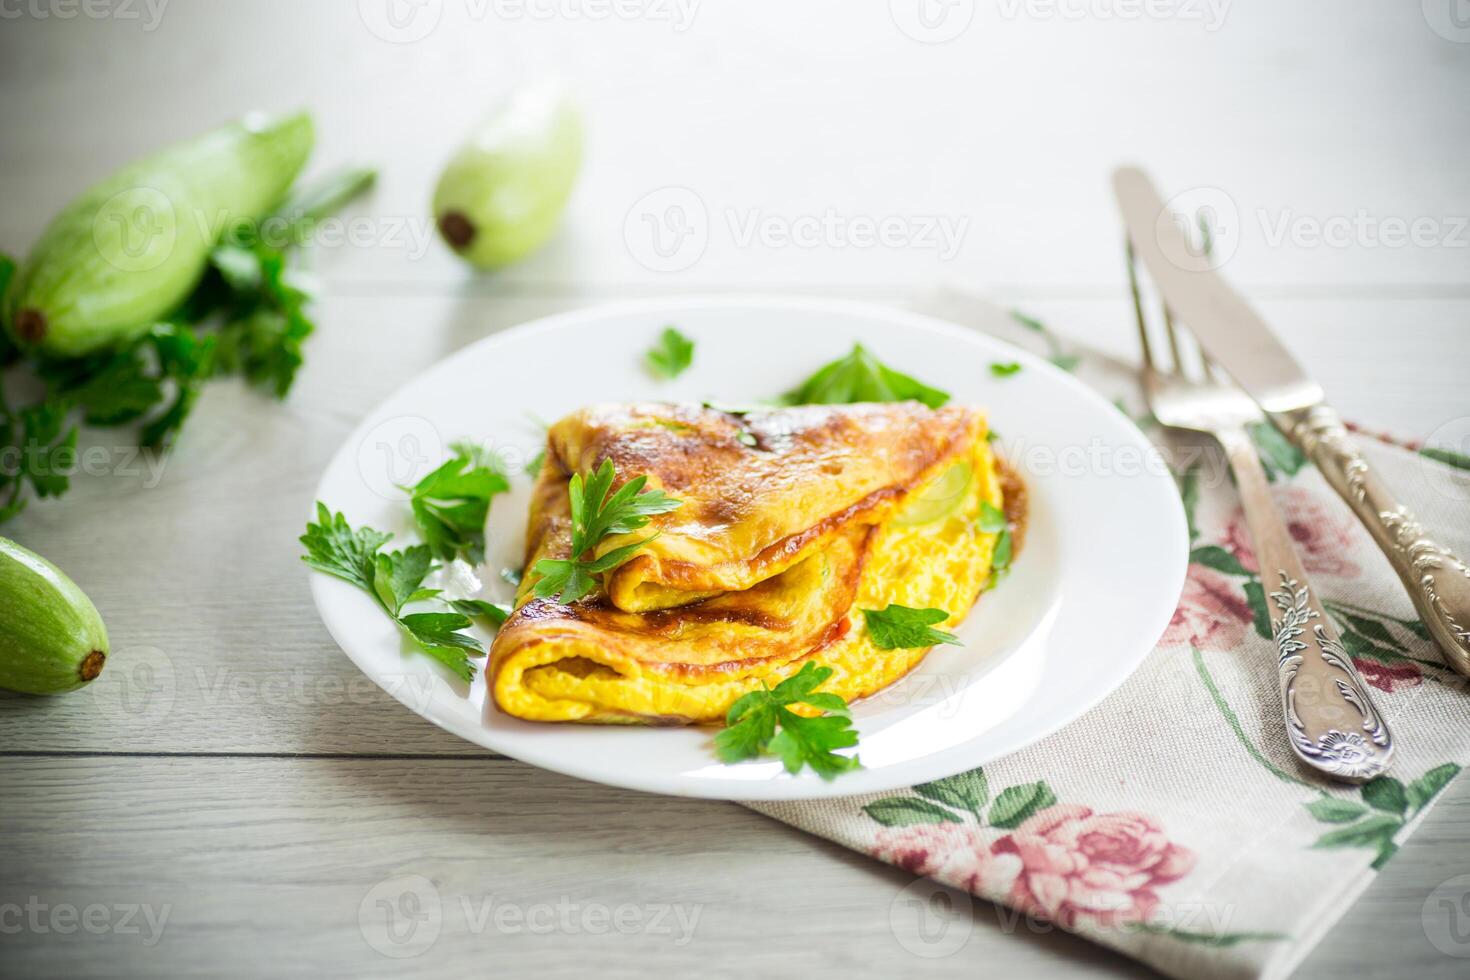 Fried omelet with zucchini, on a wooden table. photo